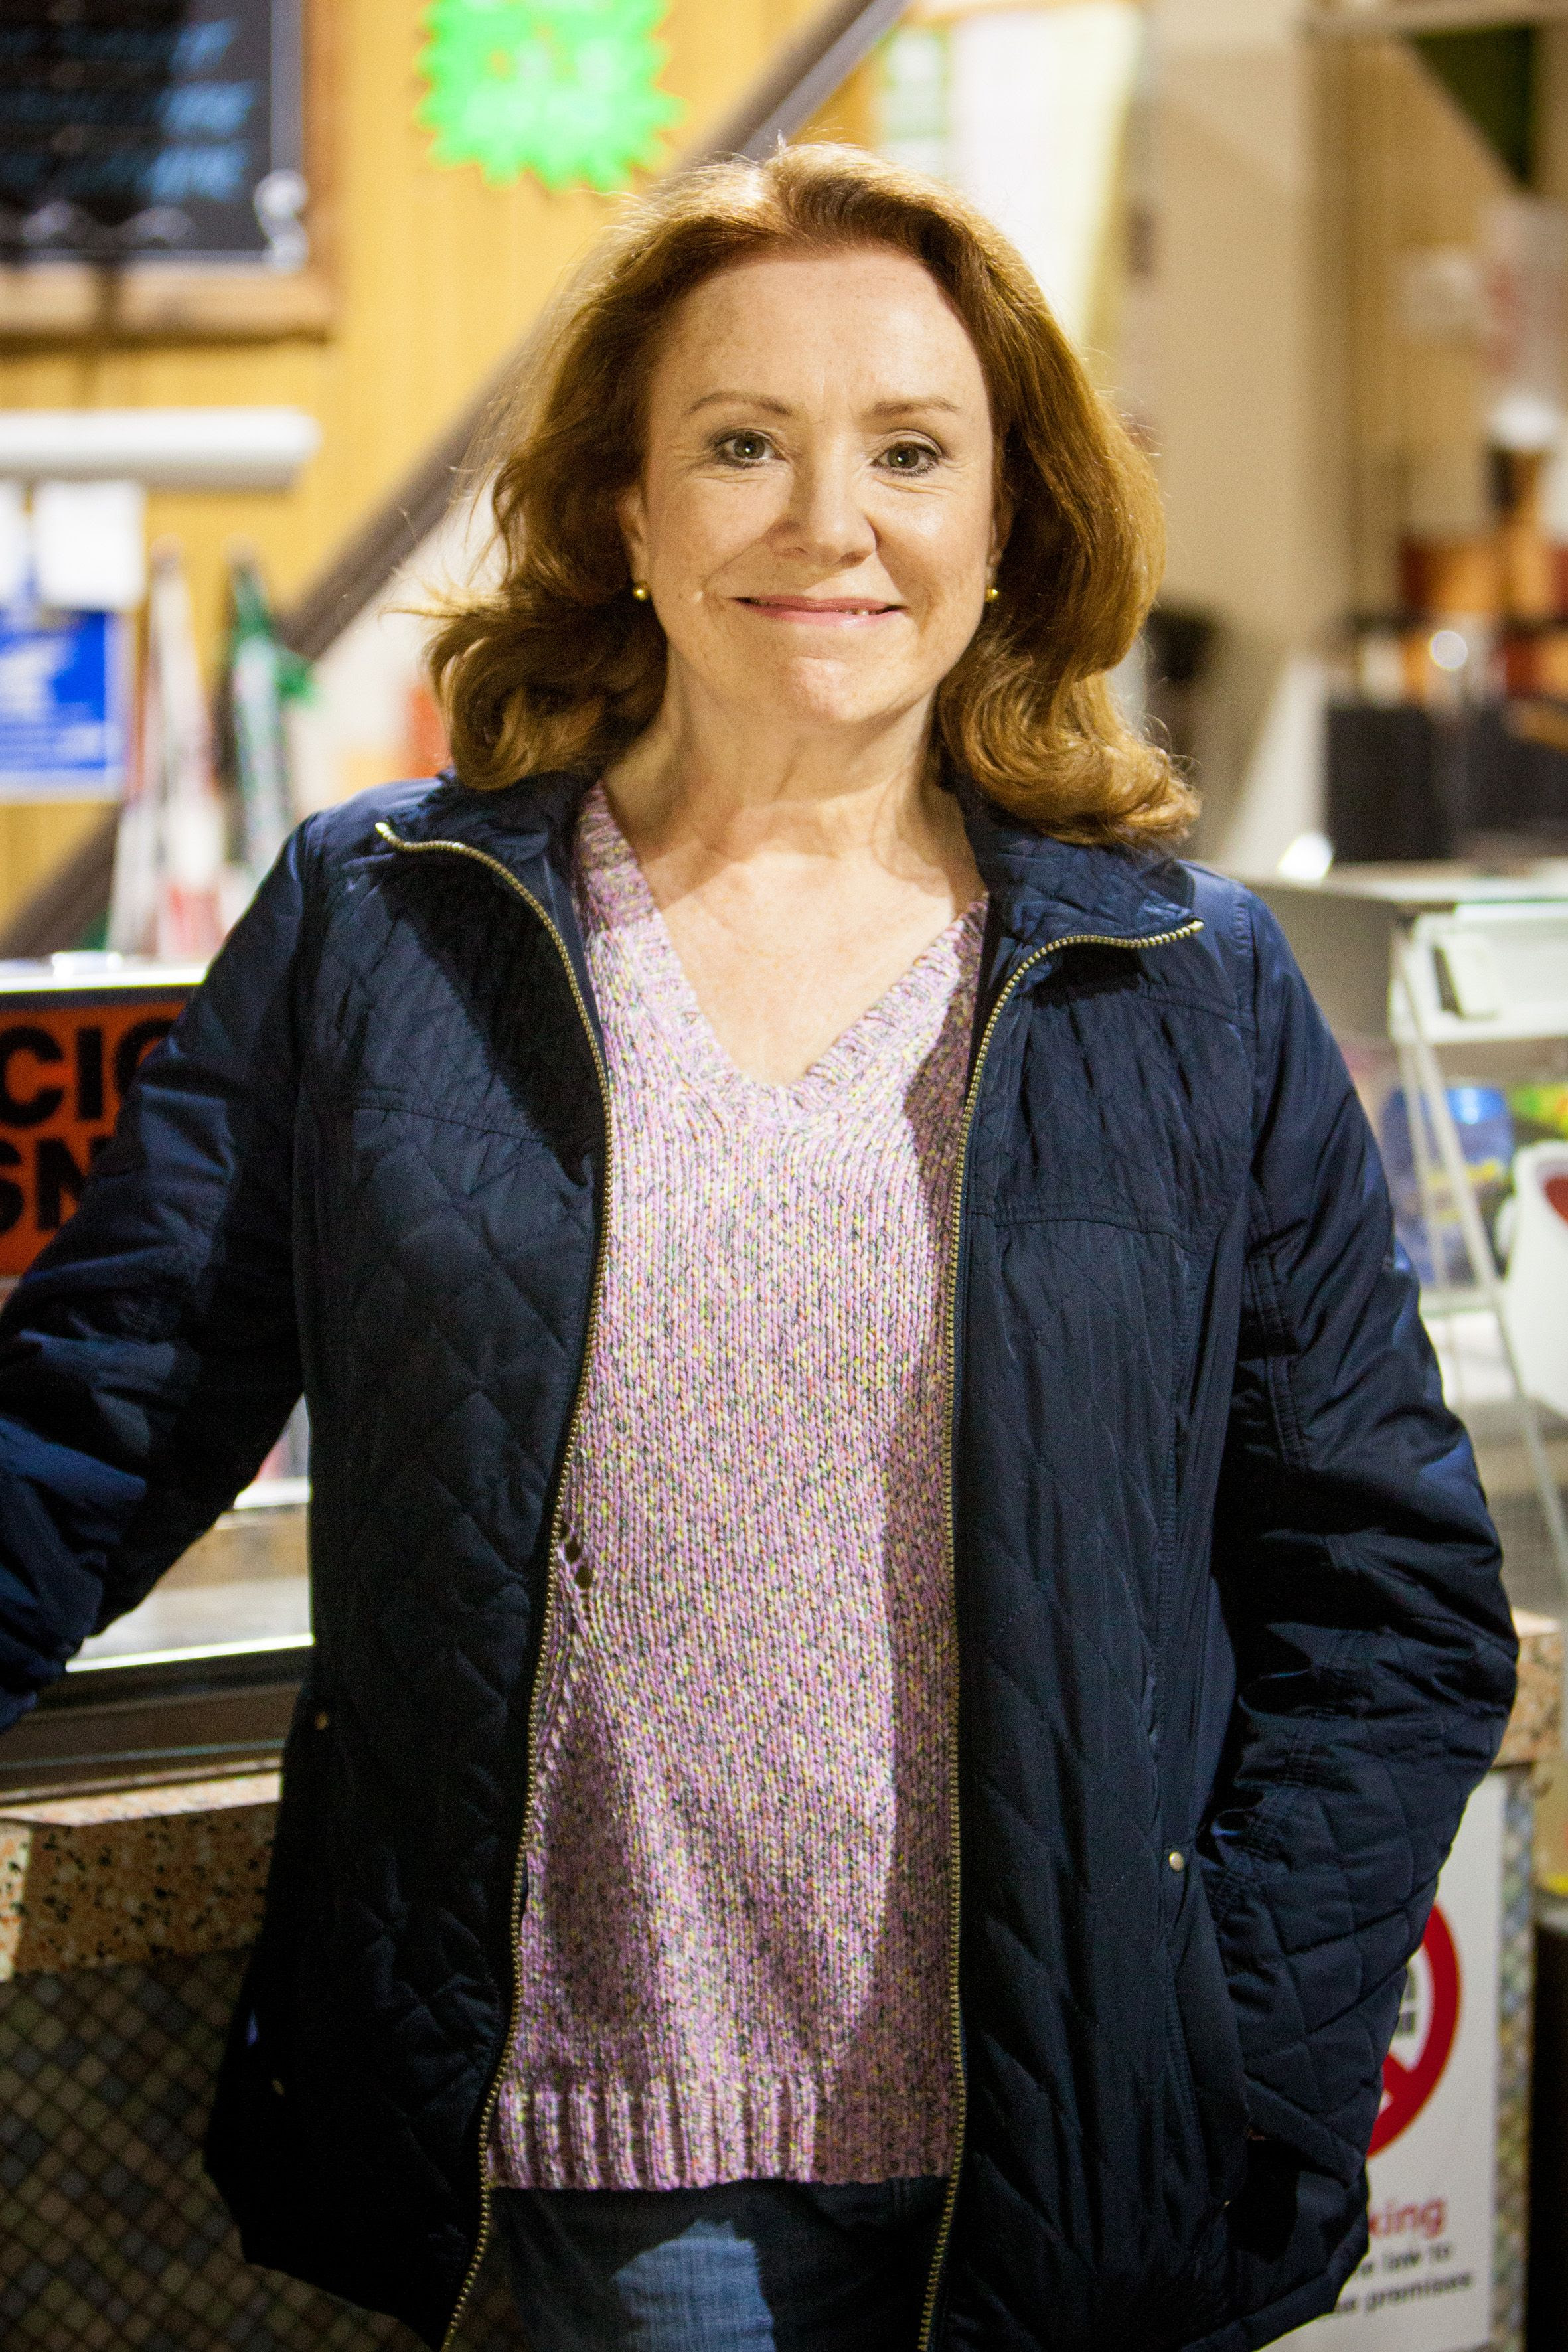 Coronation Street's Melanie Hill exits the soap as Cathy Matthews after seven years